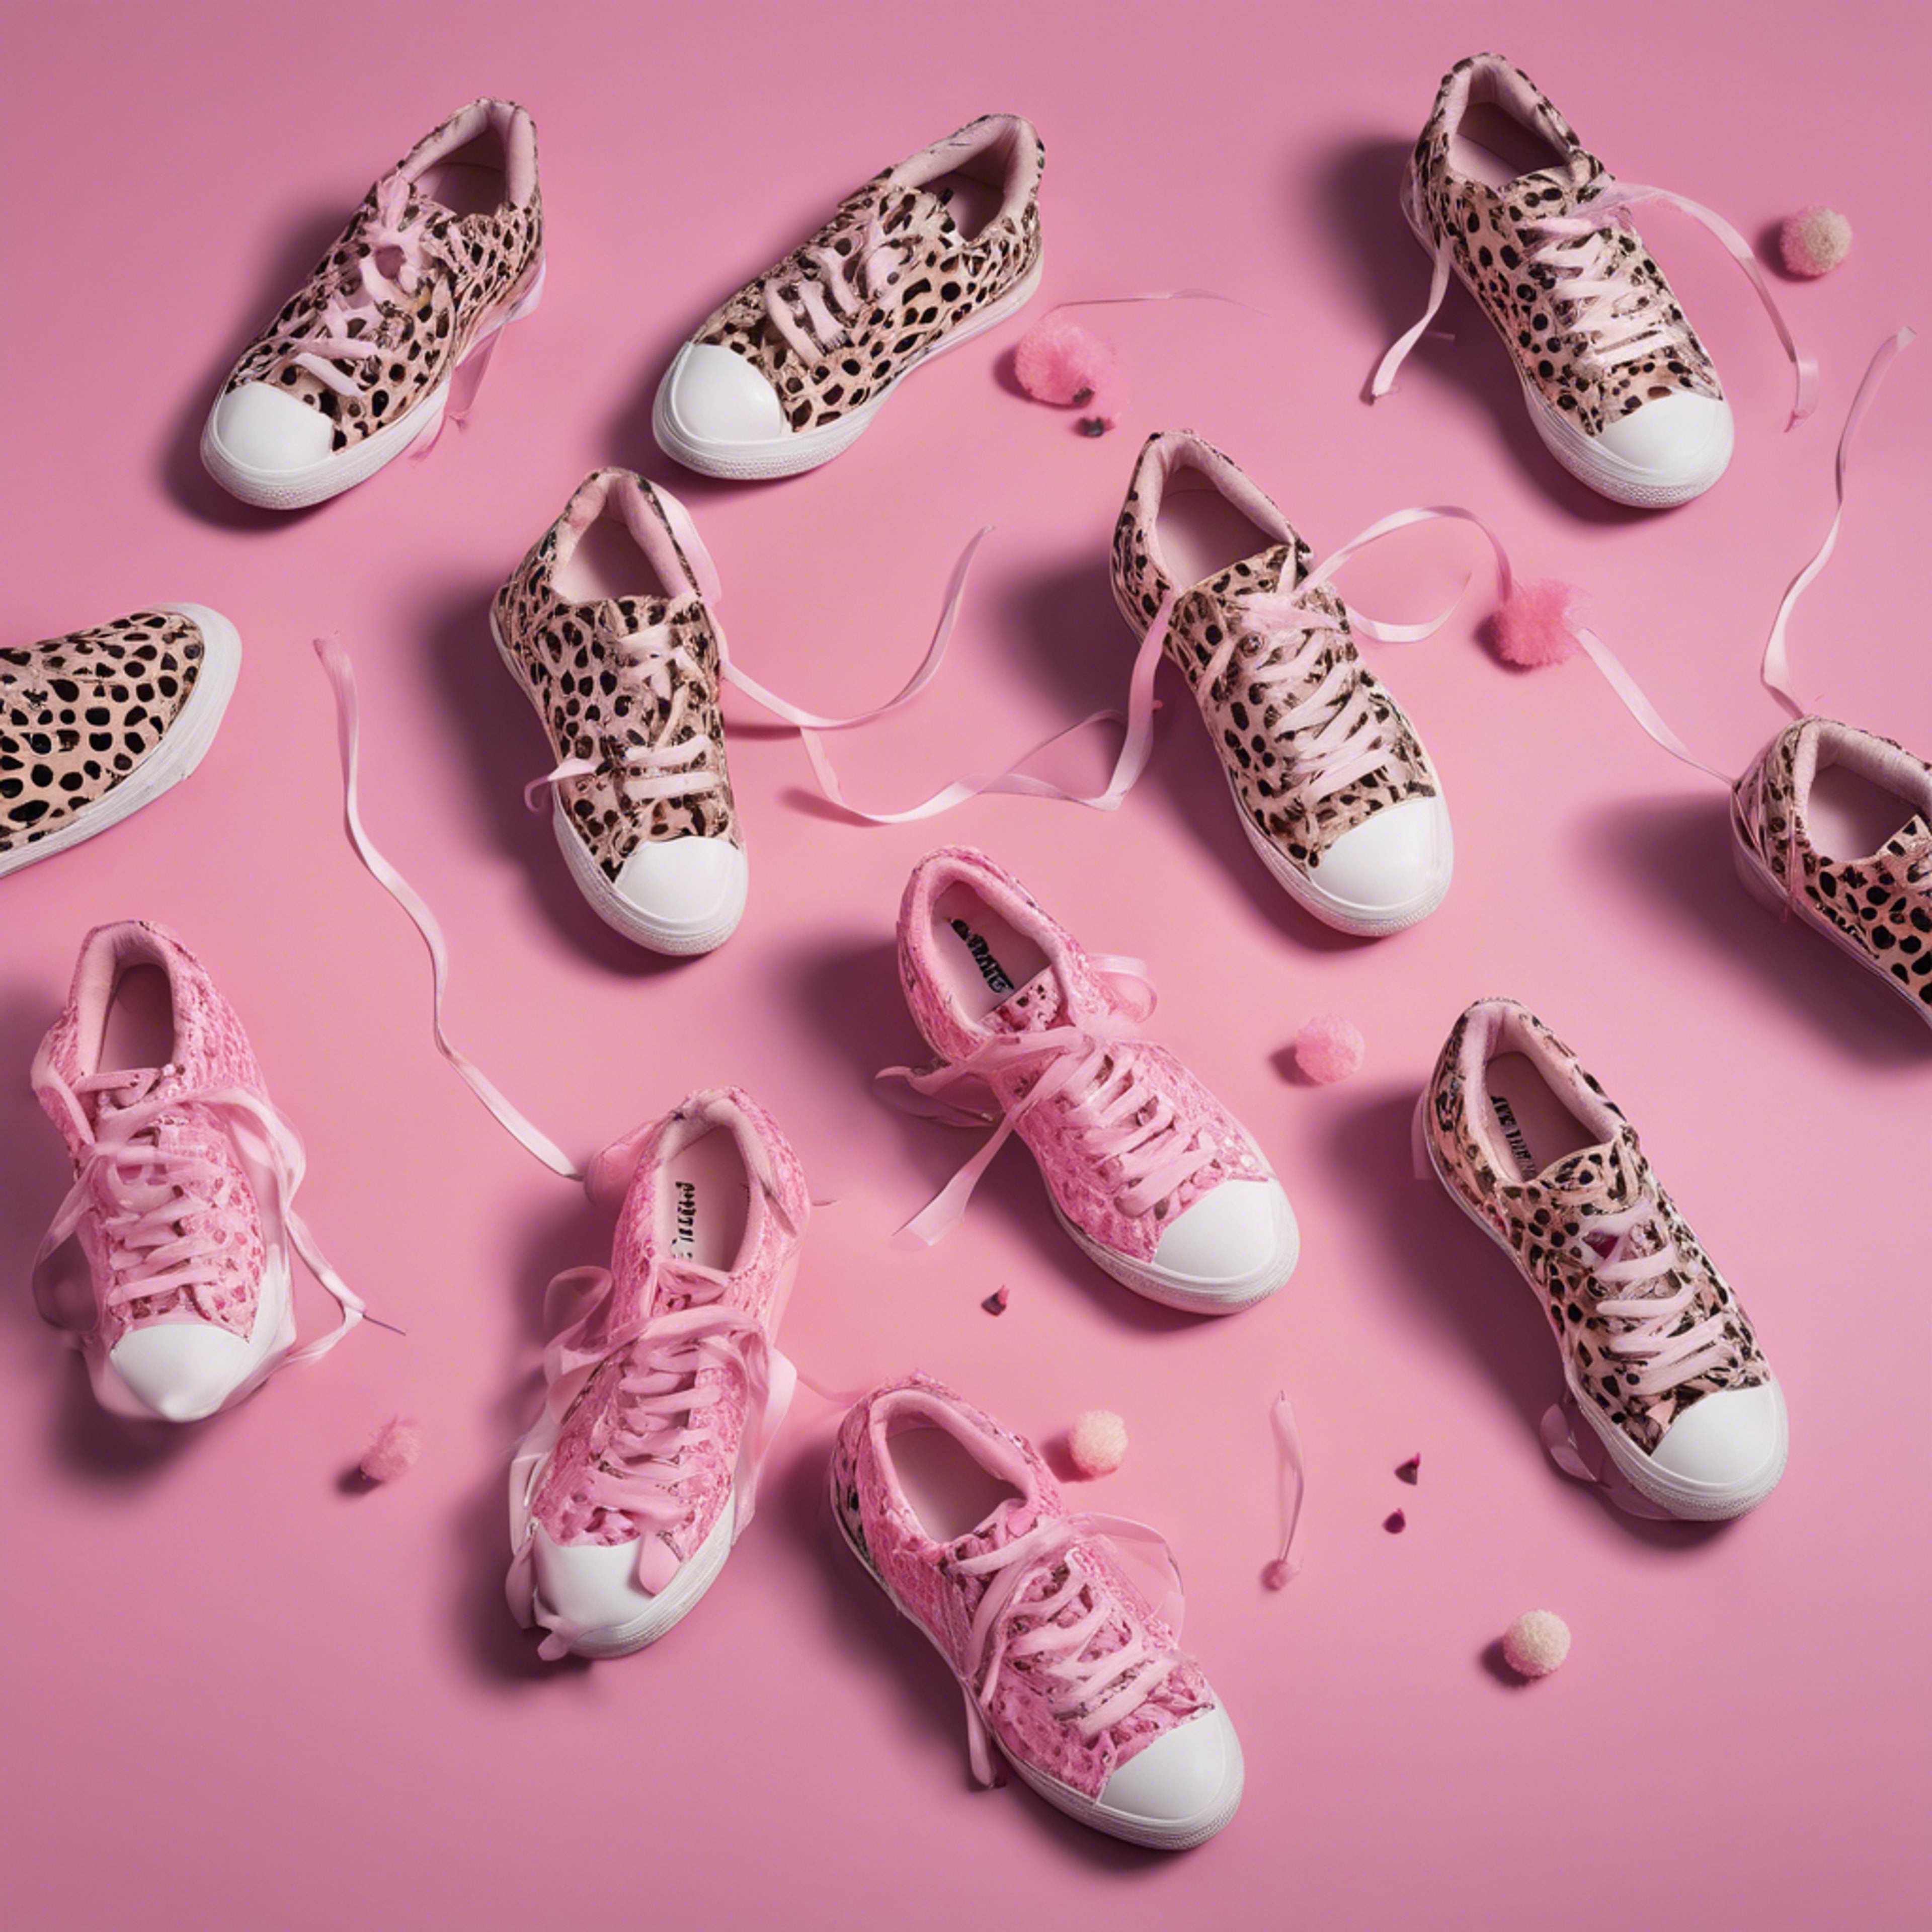 An aerial view of a pair of tennis shoes with a girly pink cheetah pattern. Kertas dinding[69b37b649749417cbf35]